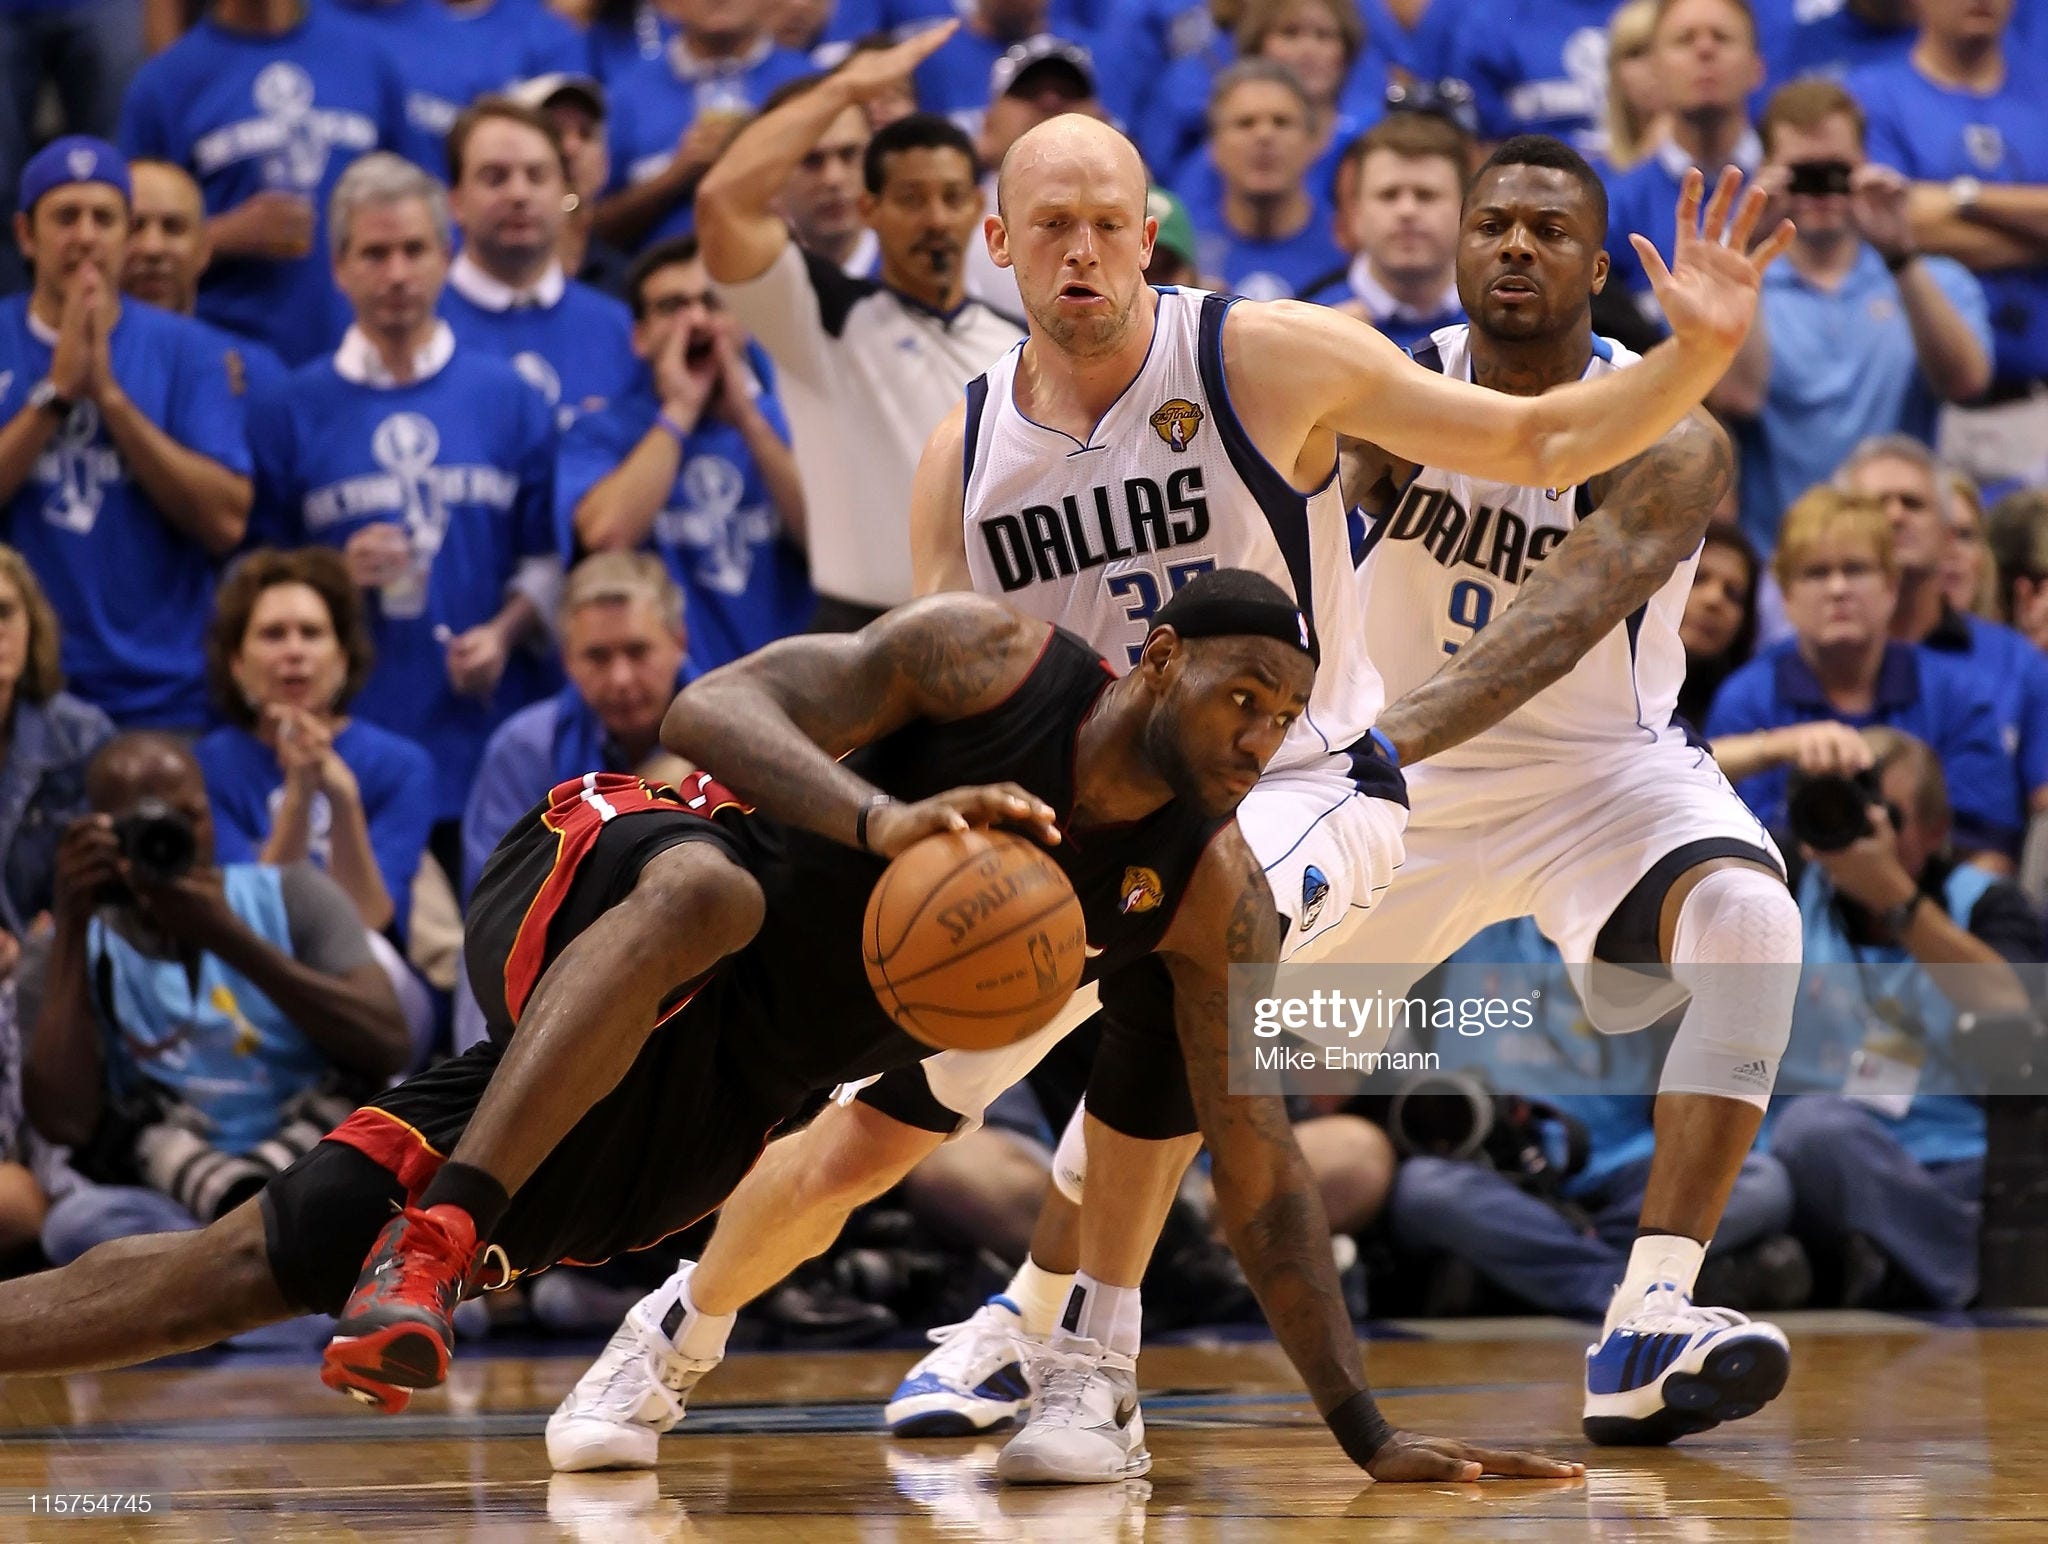 2011 NBA Finals: 4 Signs That Point to a Mavericks Game 3 Victory